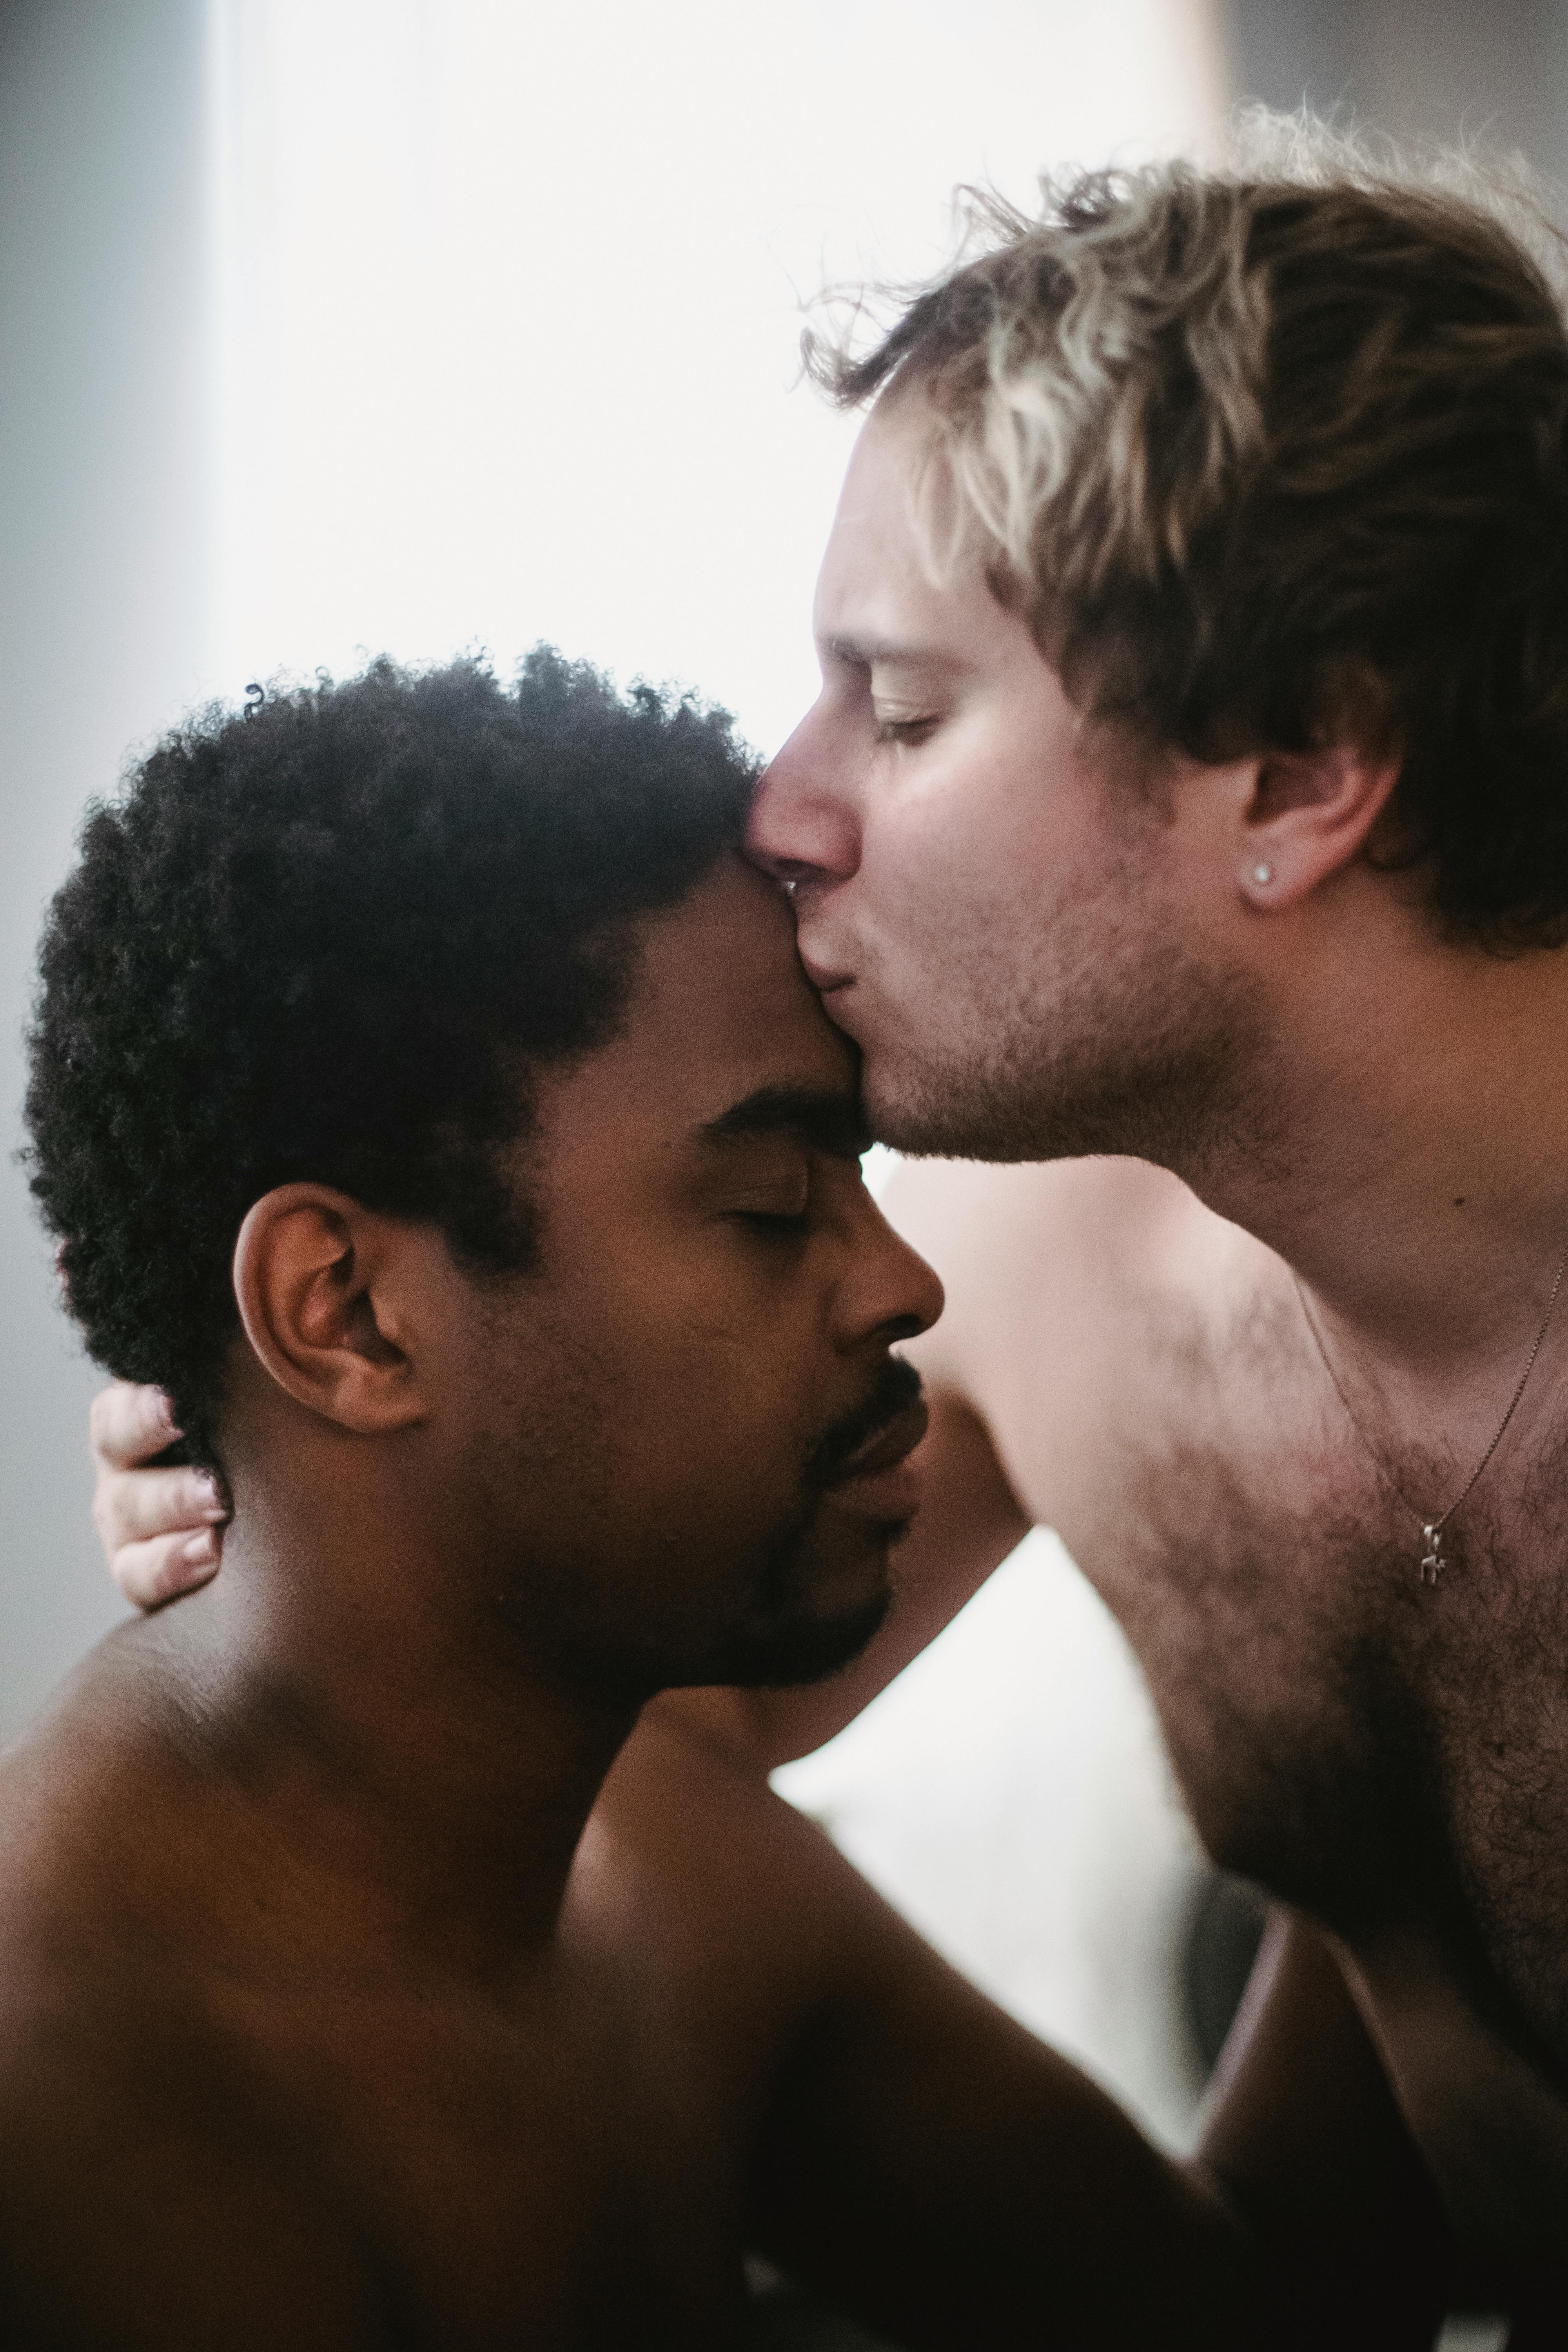 man kissing another man on the forehead